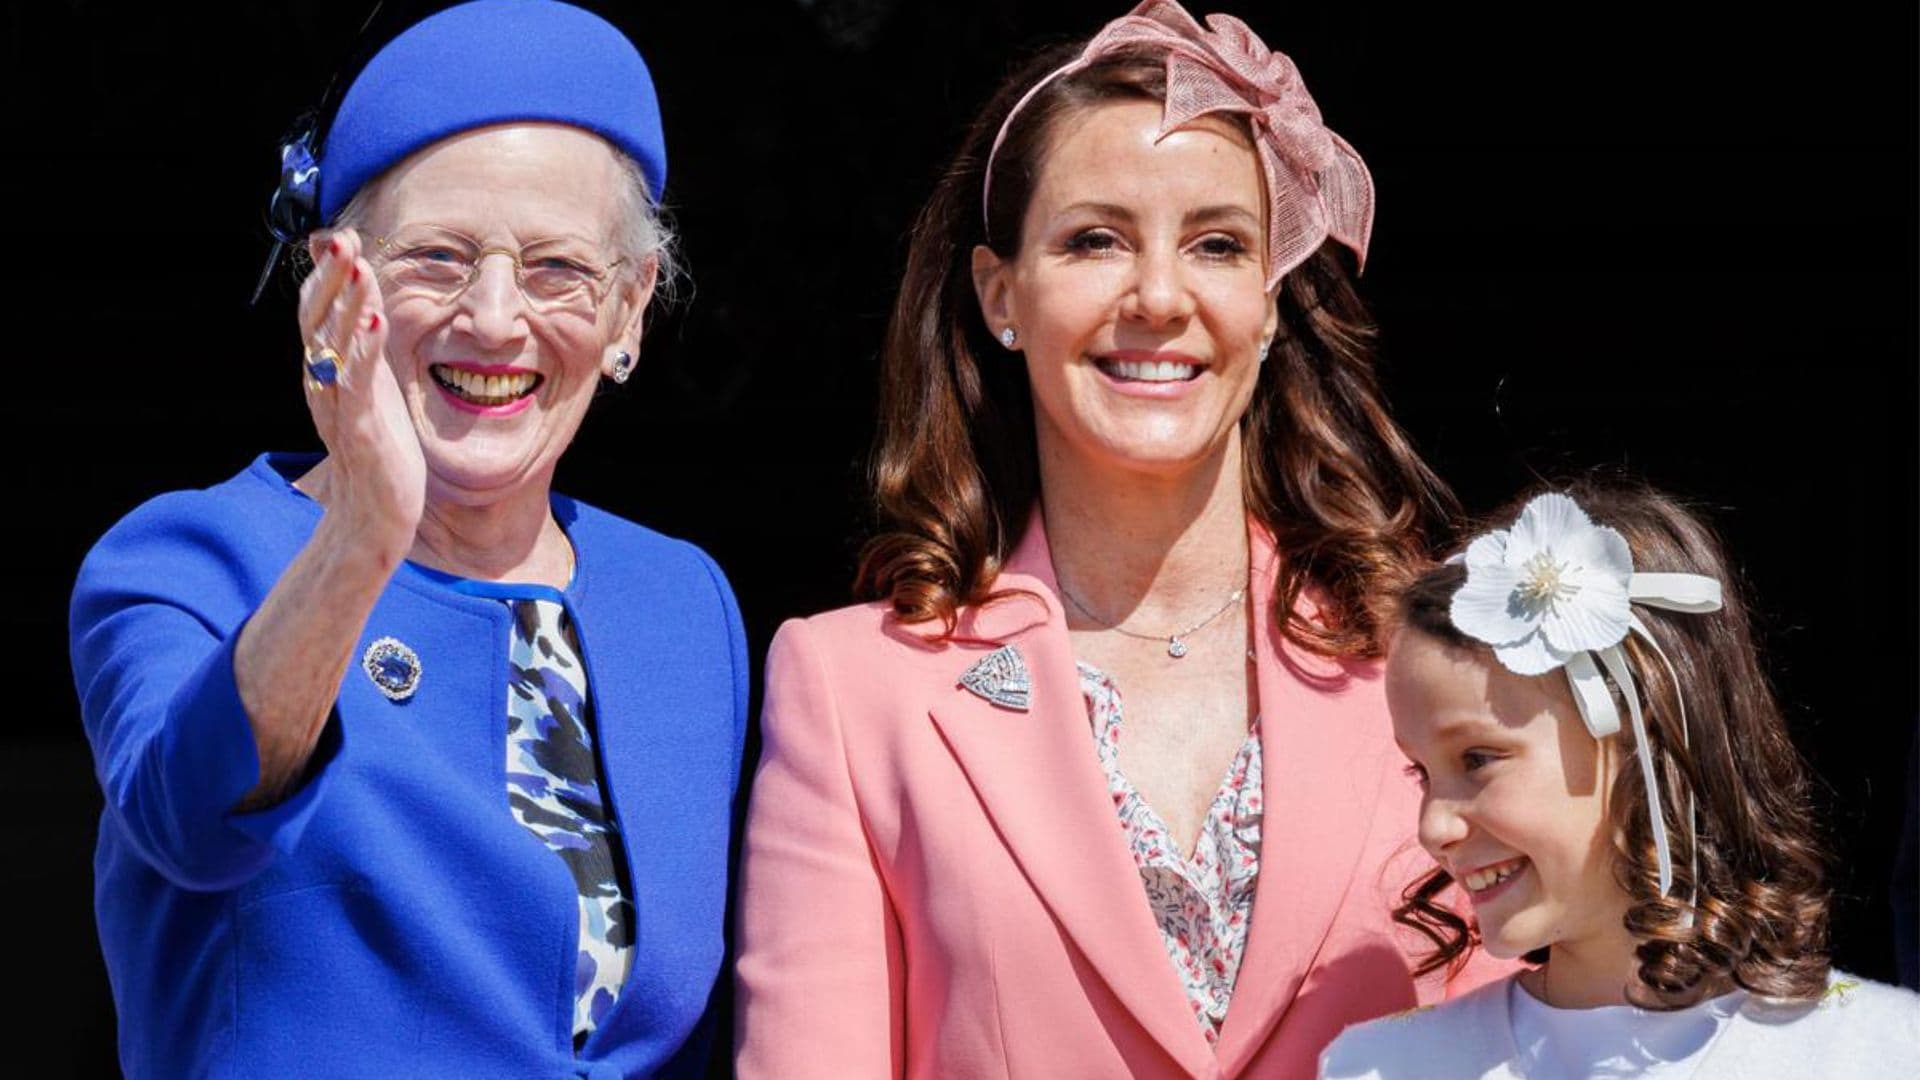 Princess Marie reveals daughter is being bullied following Queen Margrethe's decision